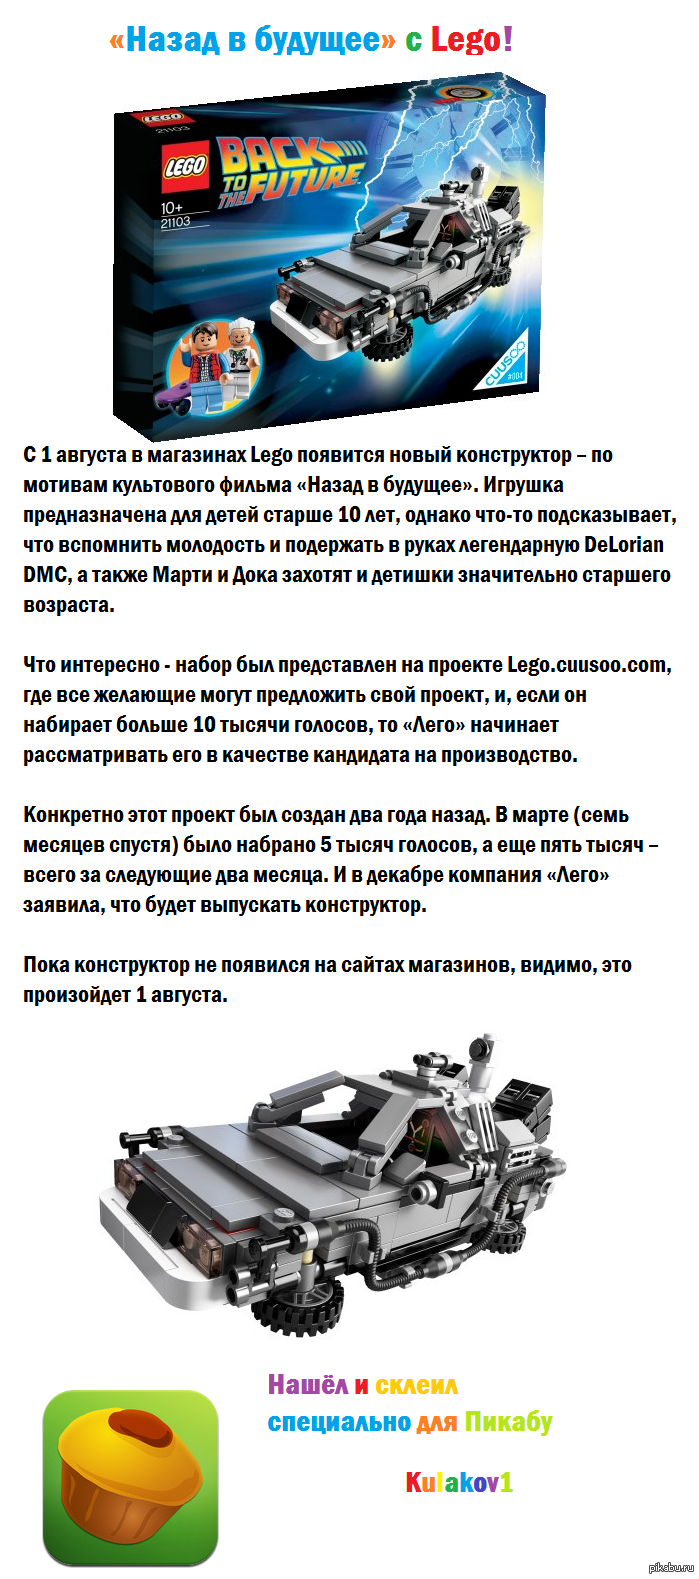 Back to the Future with Lego! - Lego, Назад в будущее, Back to the future (film)